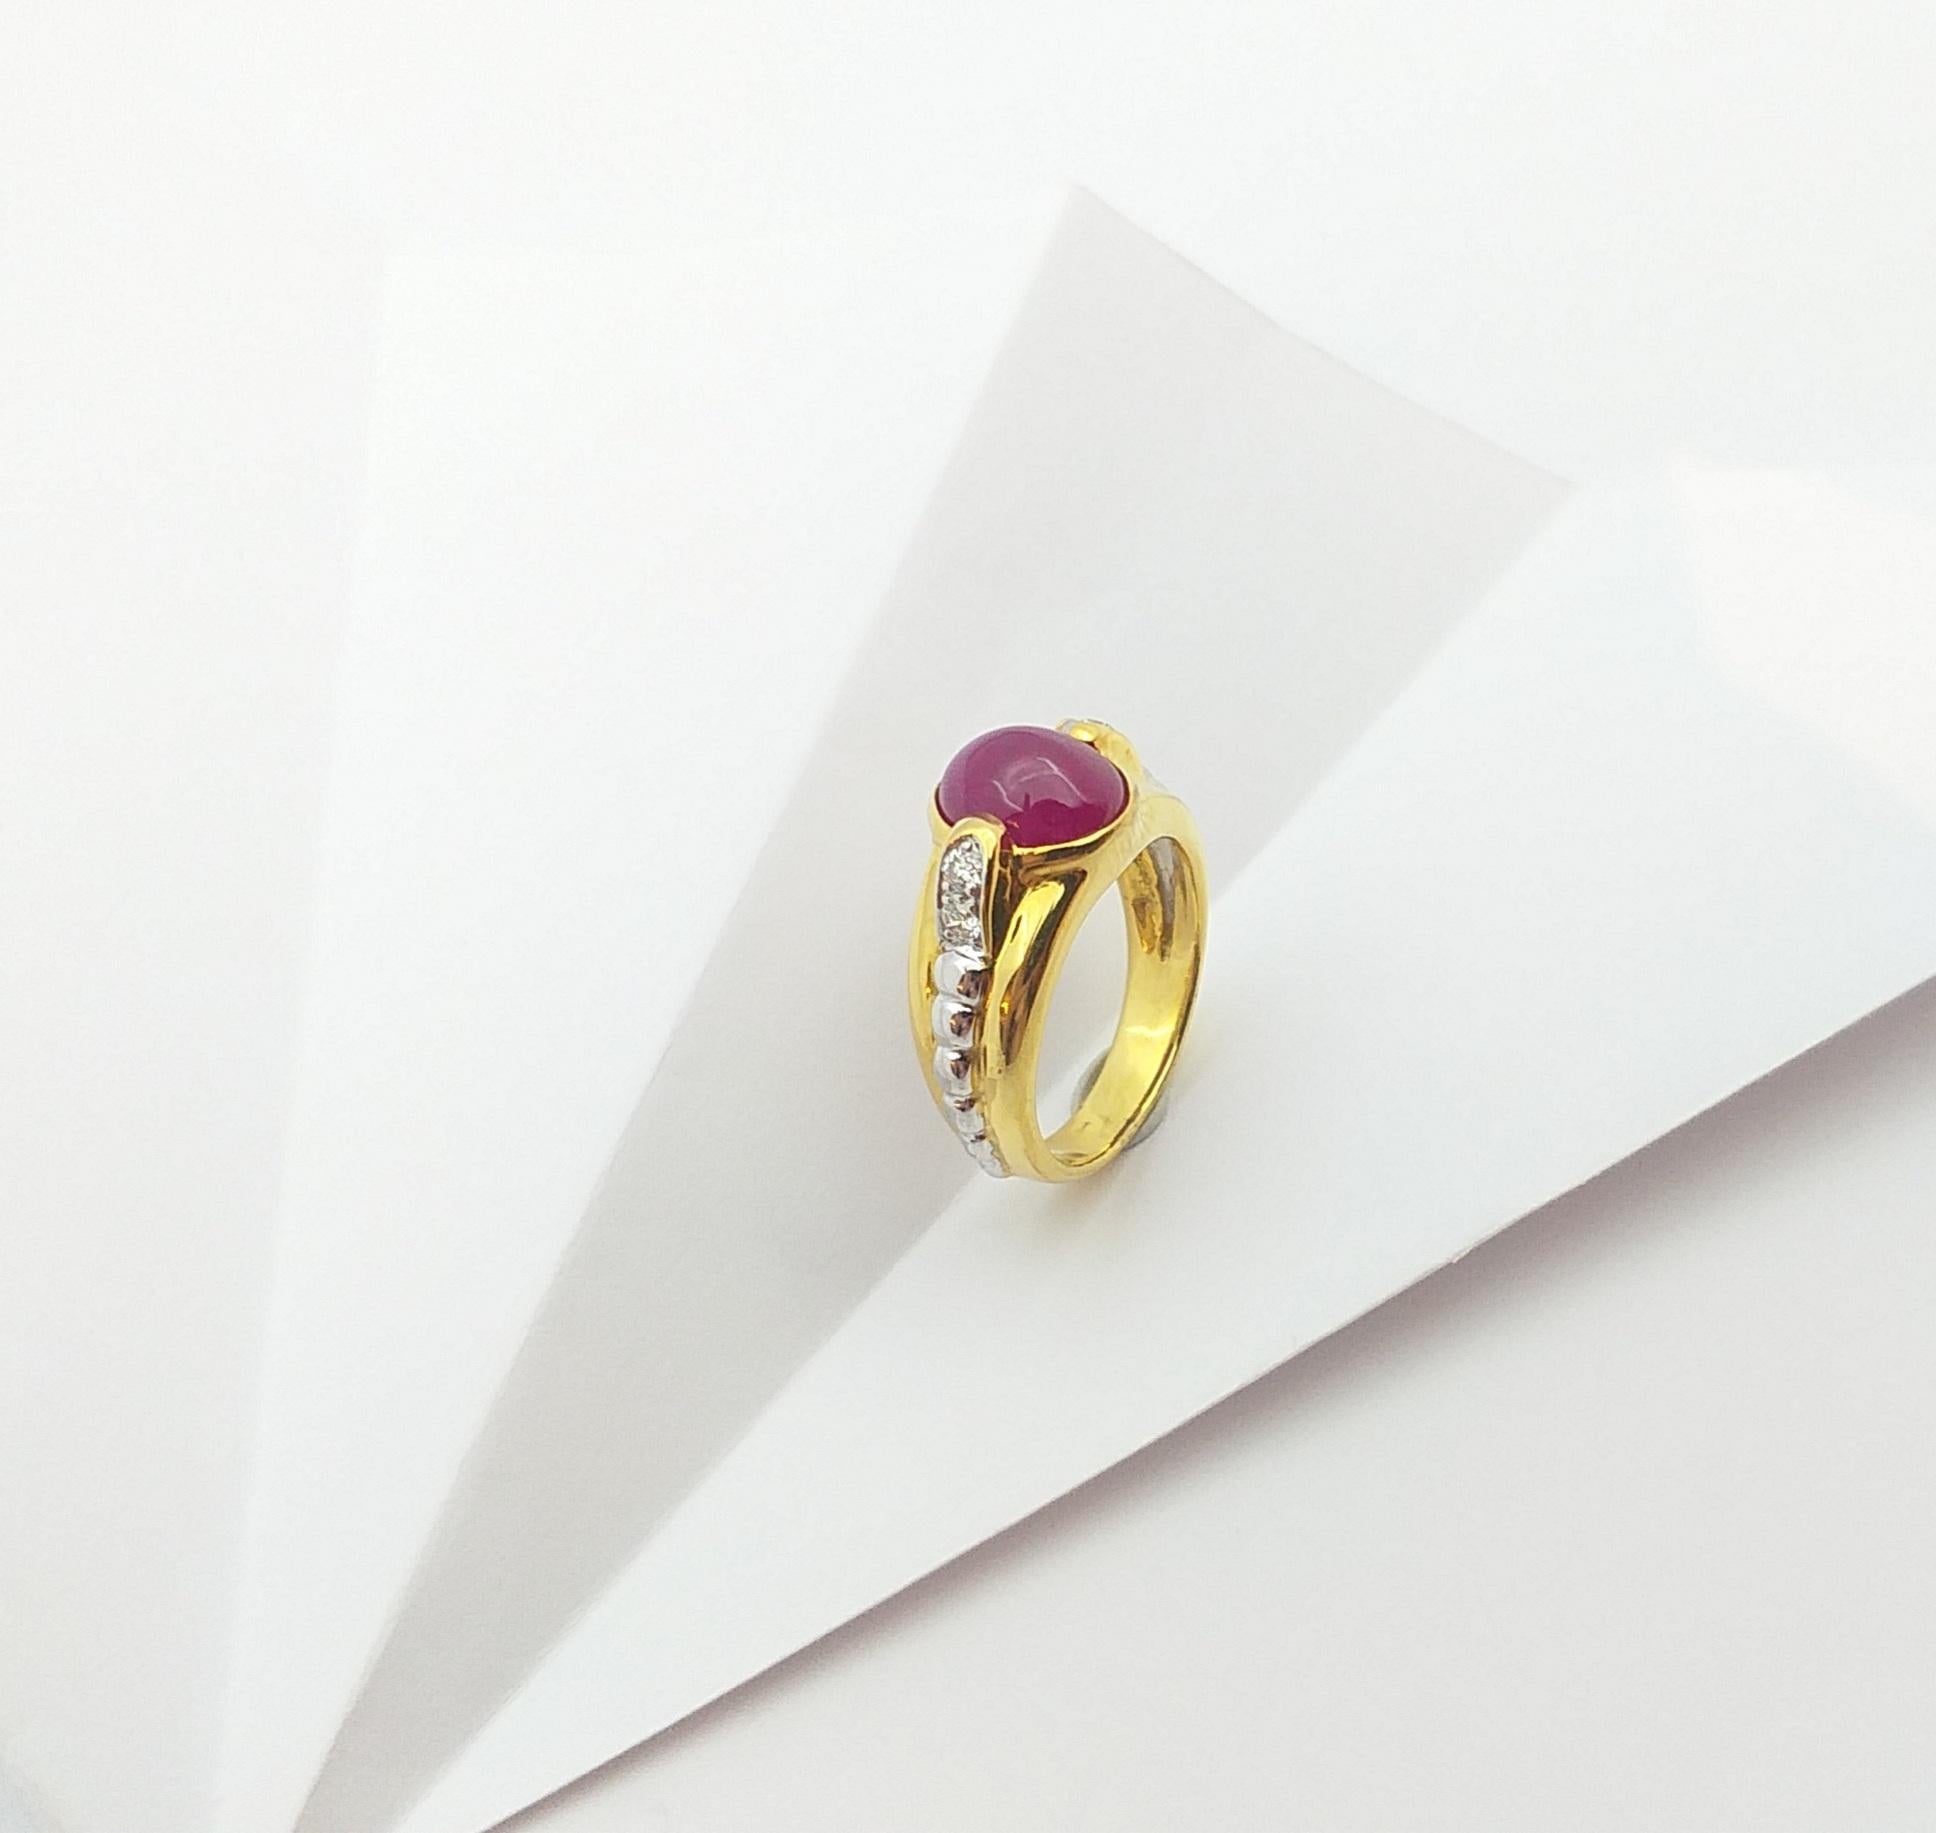 Cabochon Ruby with Diamond Ring Set in 18 Karat Gold Settings For Sale 5